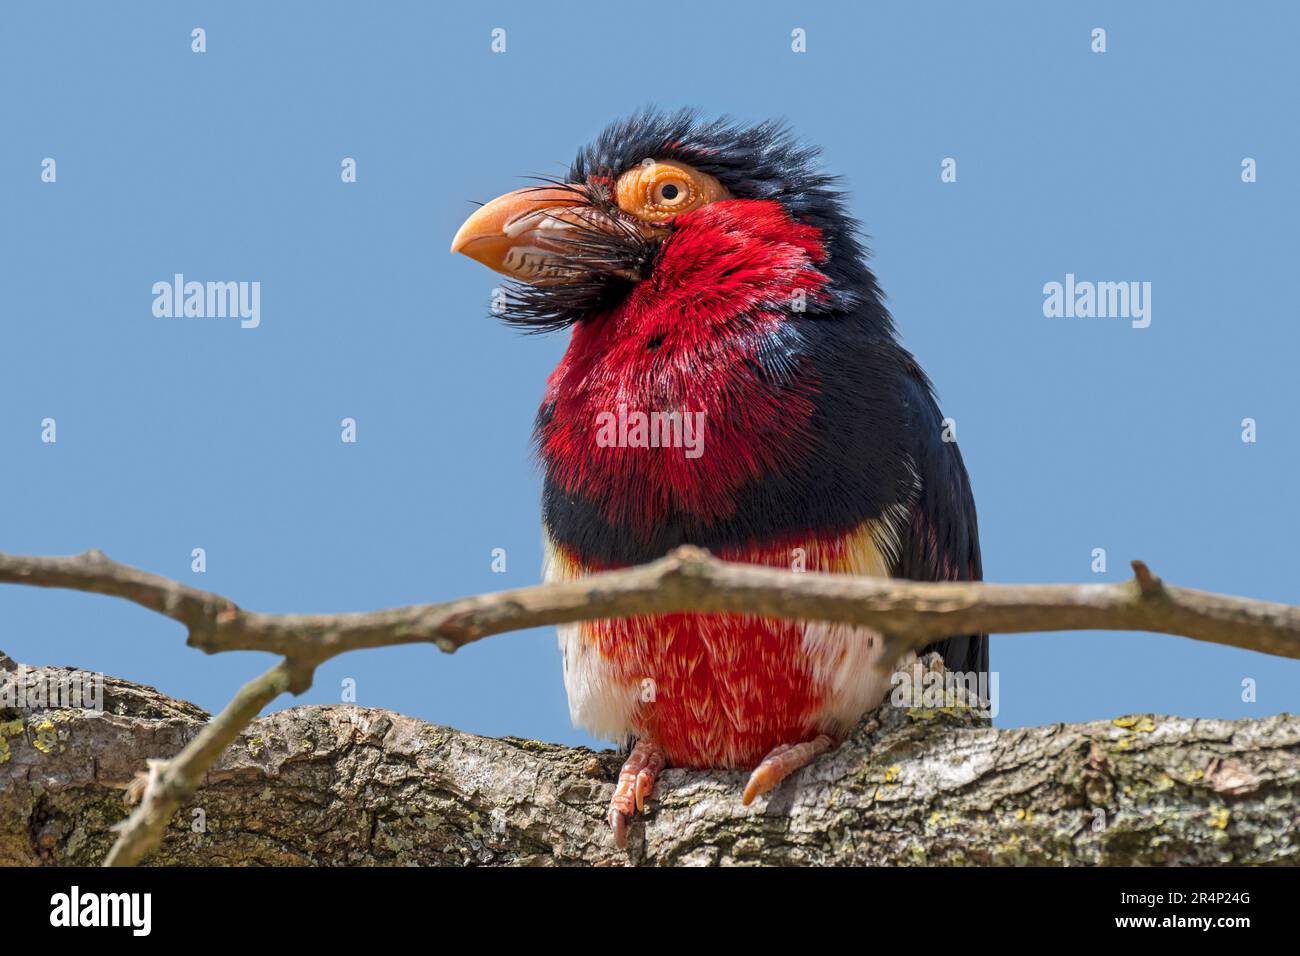 Bearded barbet (Lybius dubius) perched in tree, arboreal bird native to tropical west Africa Stock Photo